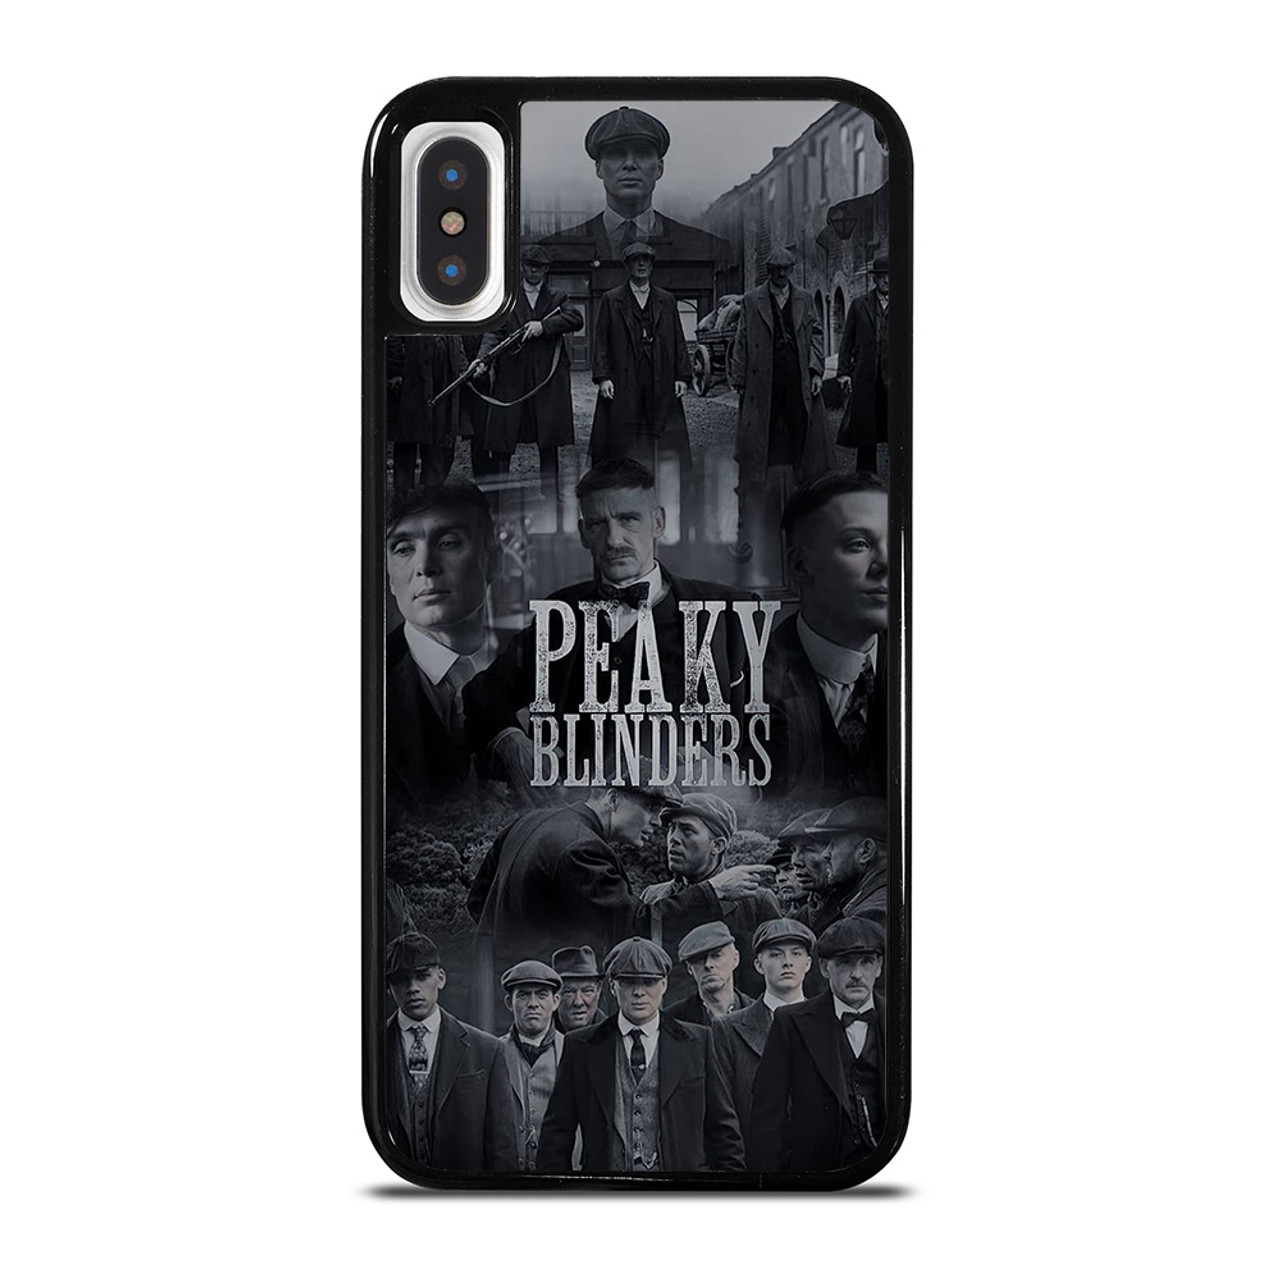 PEAKY BLINDERS CHARACTERS iPhone X / XS Case